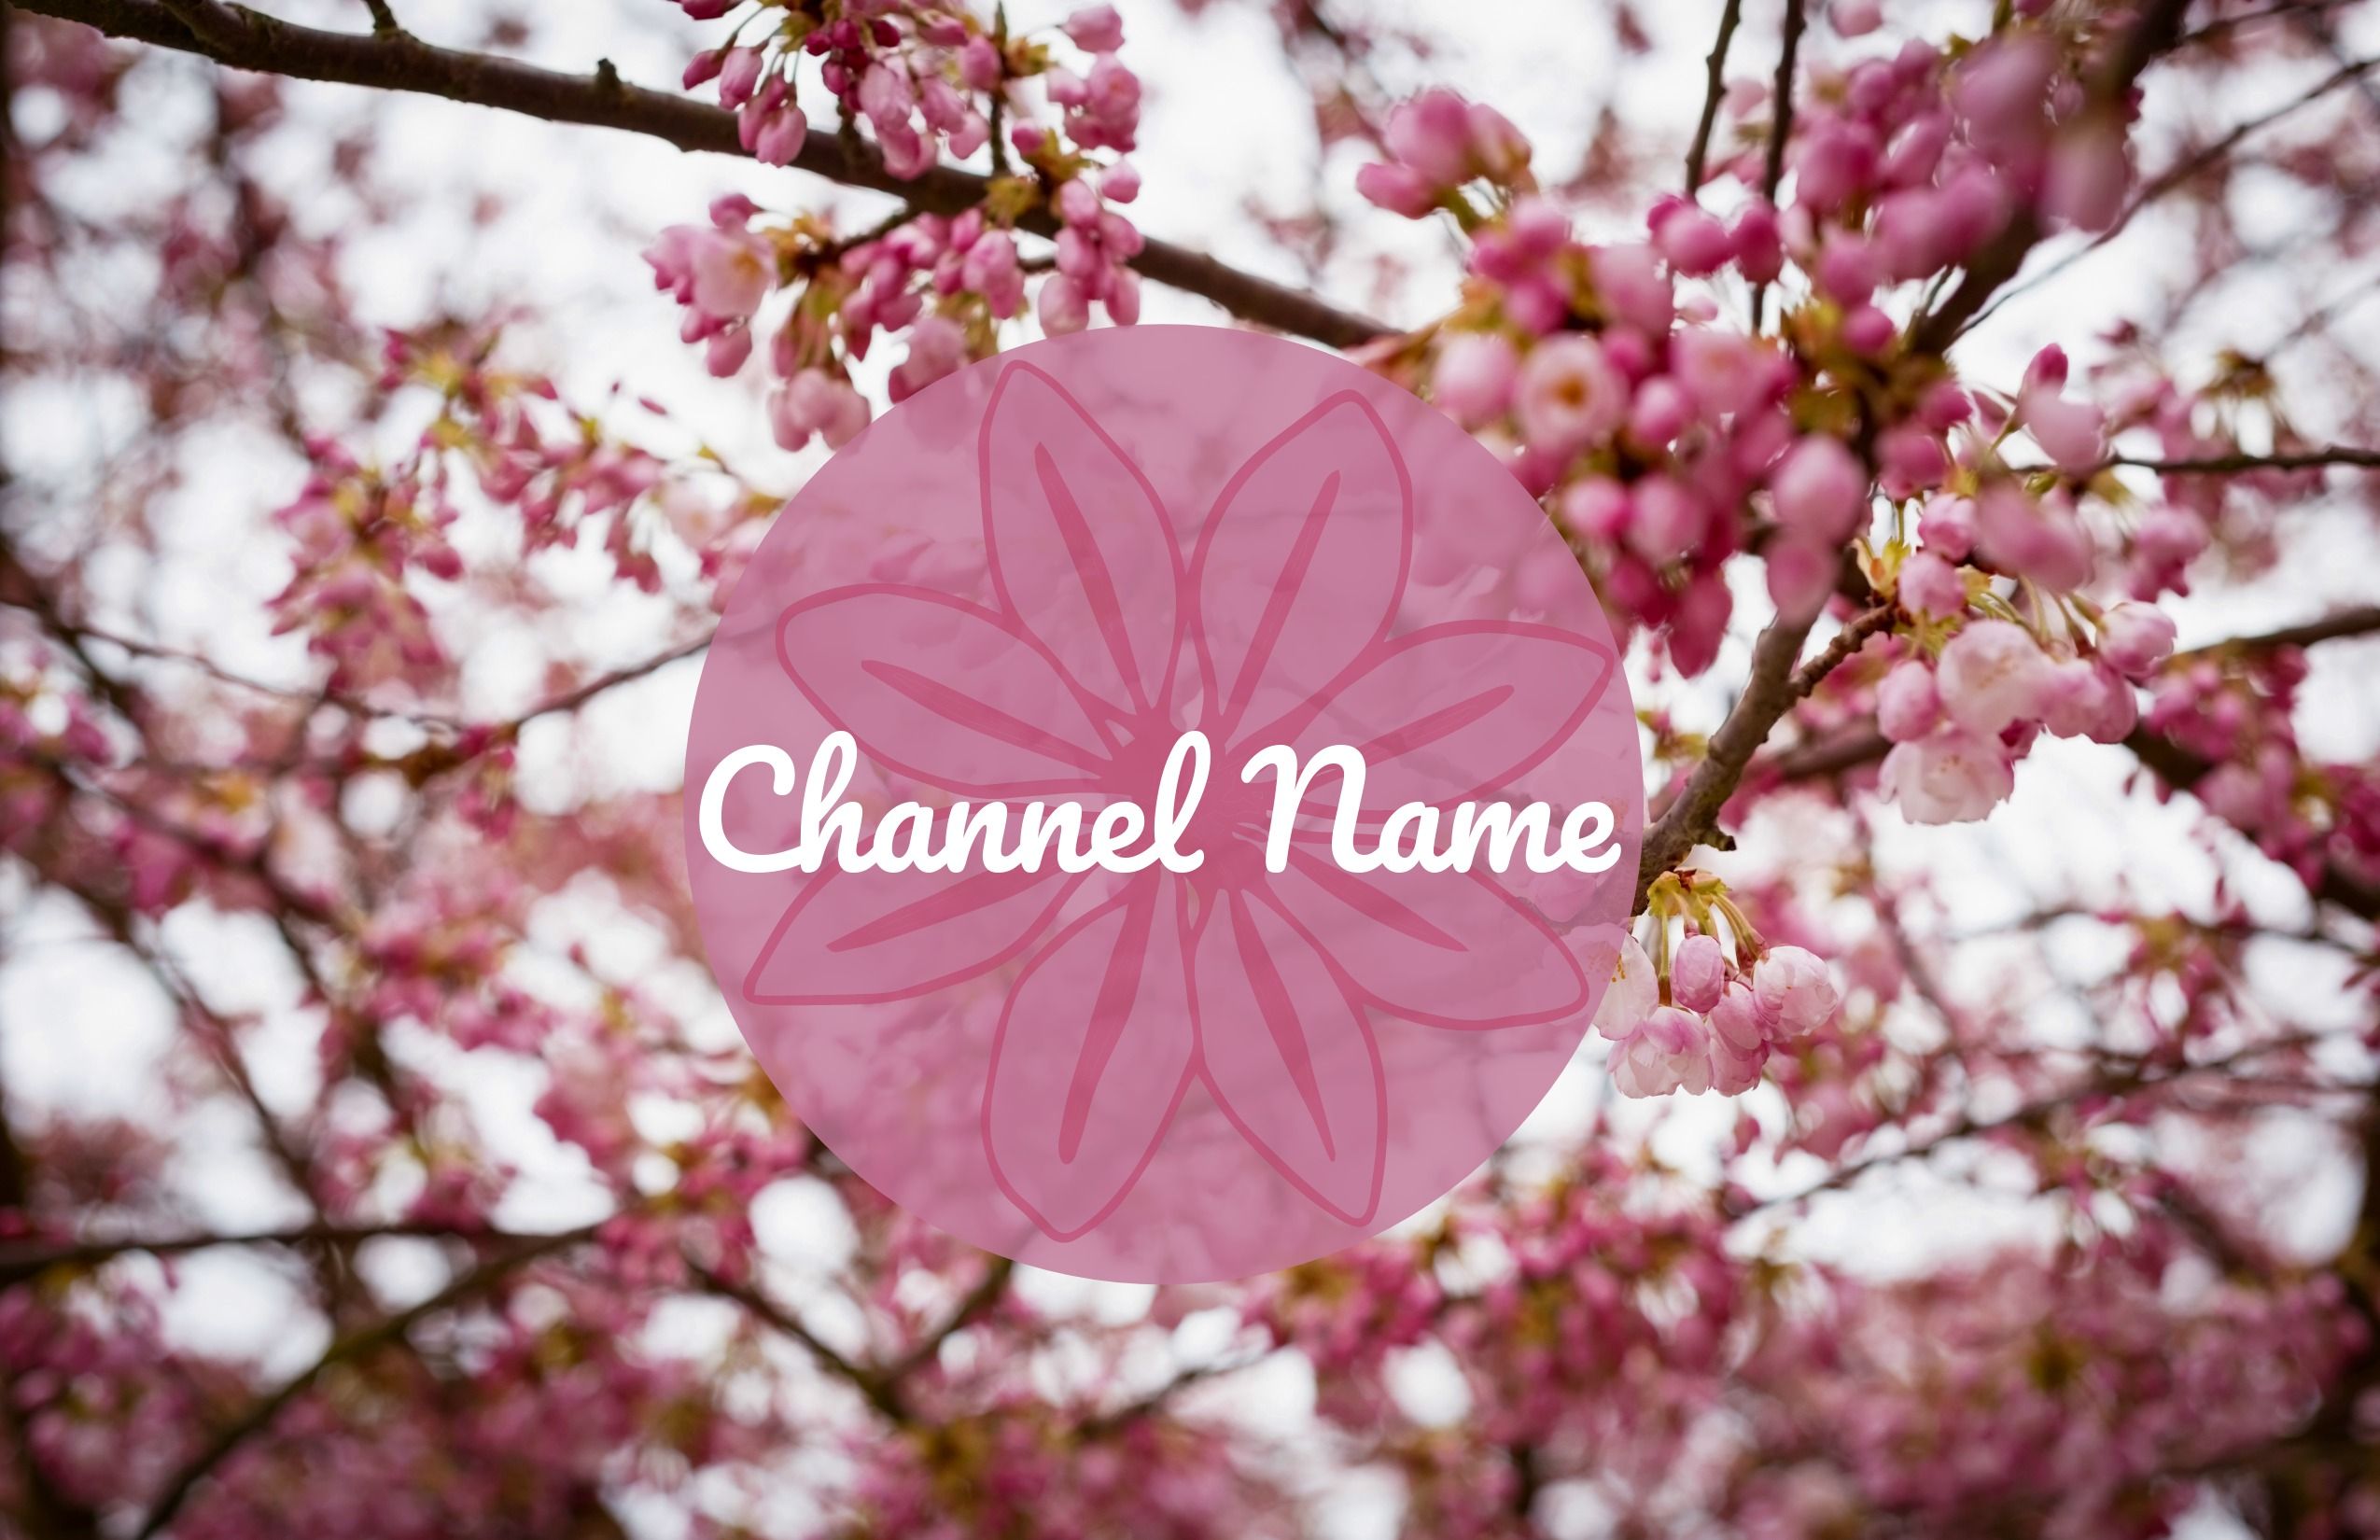 Cherry blossom tree YouTube cover design - 50 ideas and templates to use in your designs - Image